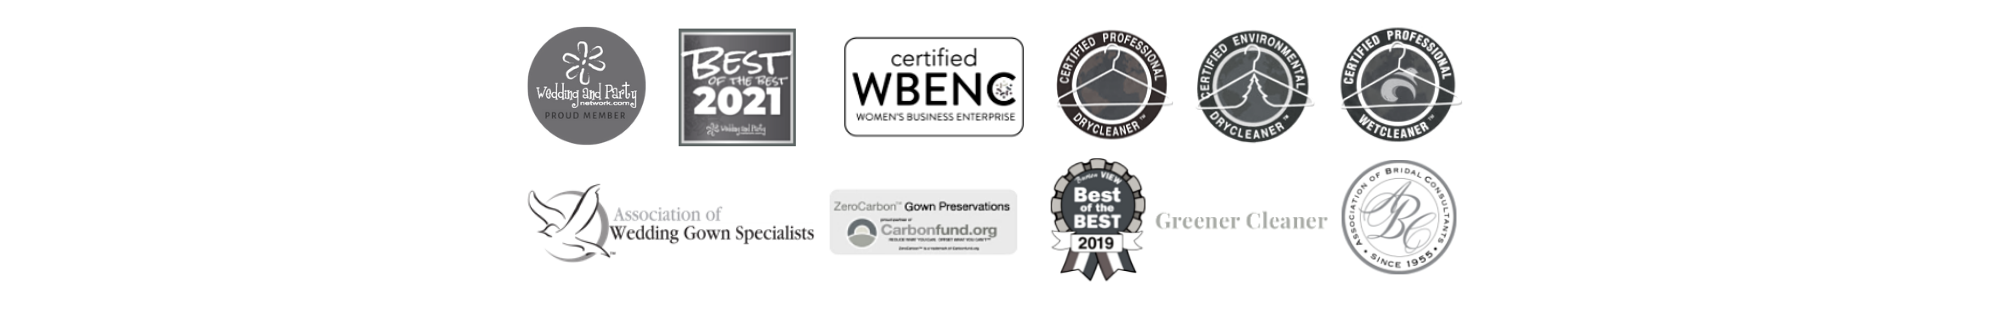 collage of awards and certifications